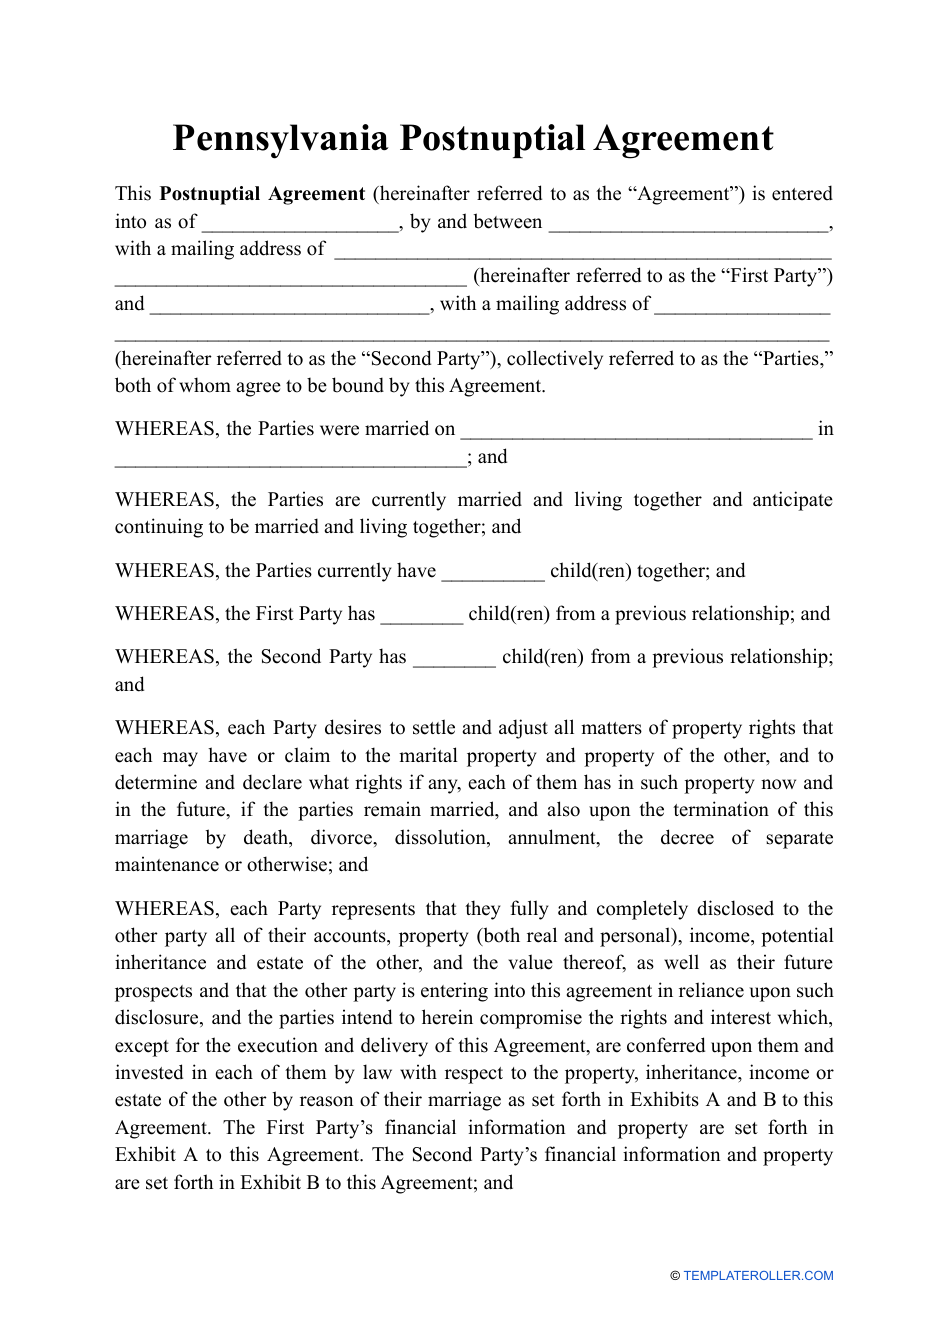 Postnuptial Agreement Template - Pennsylvania, Page 1